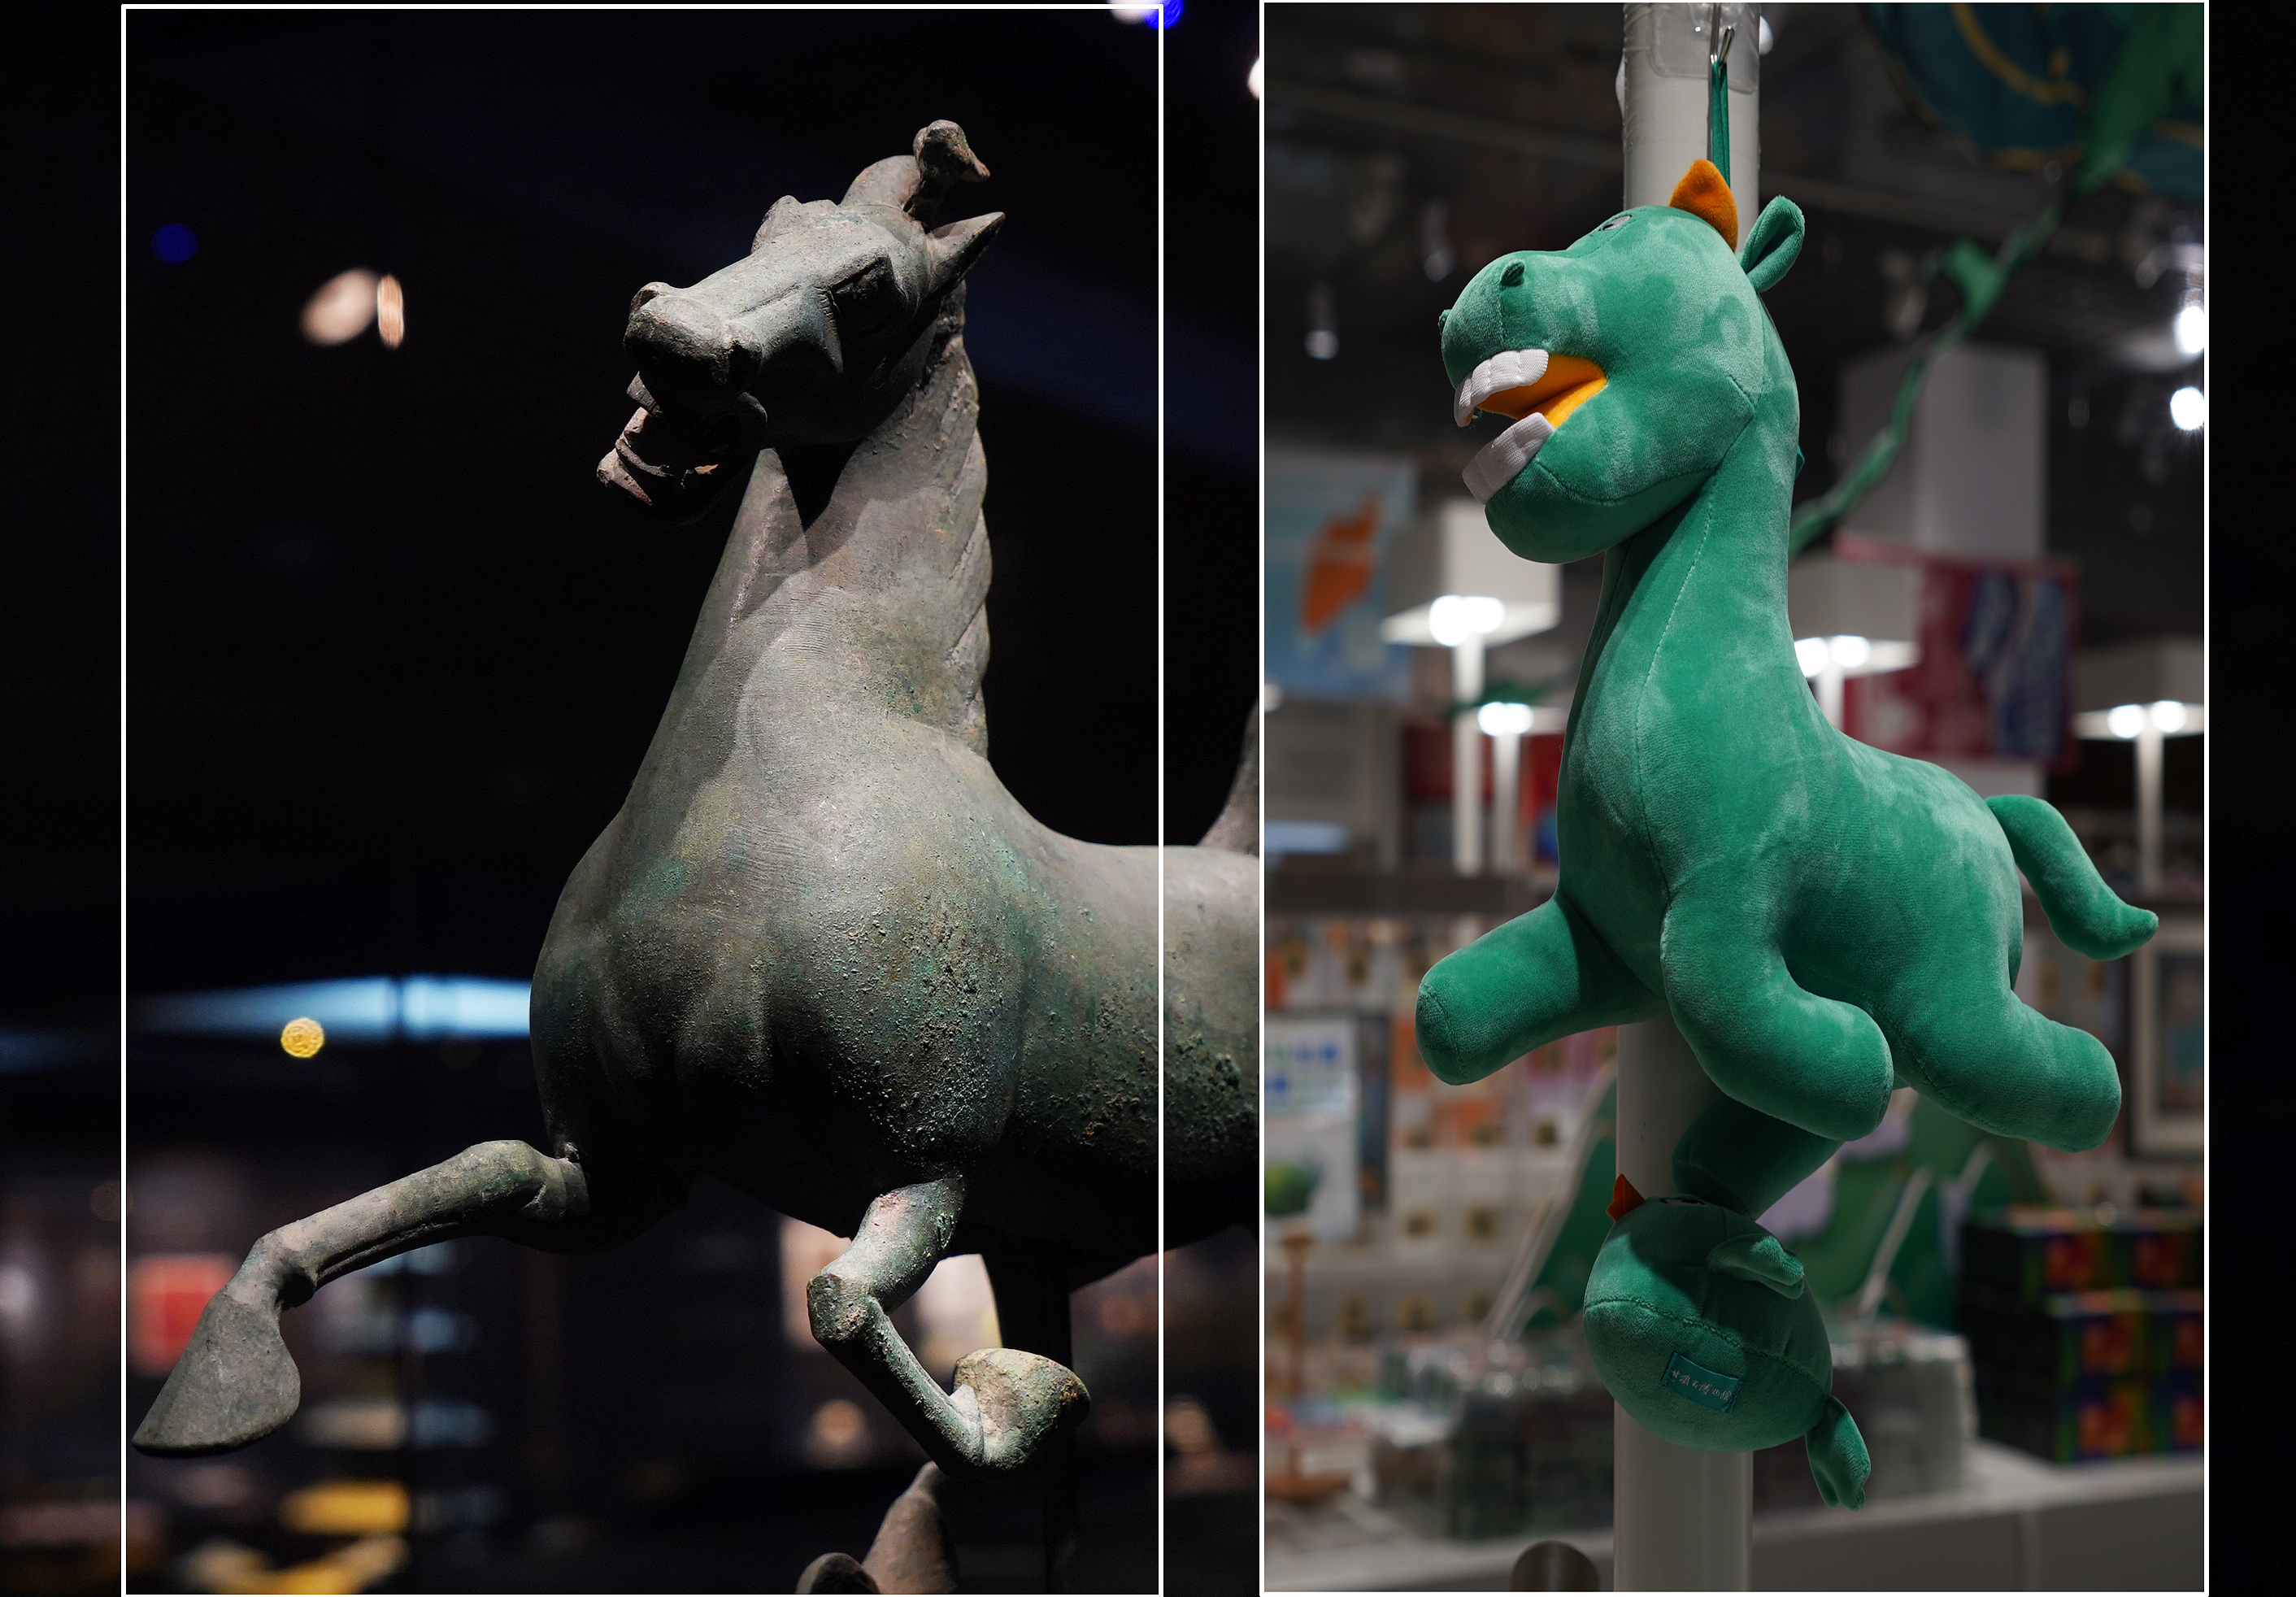 Comparison between the bronze galloping horse and a toy based on the cultural relic, Lanzhou, capital of northwest China's Gansu Province, June 28, 2022. /CFP